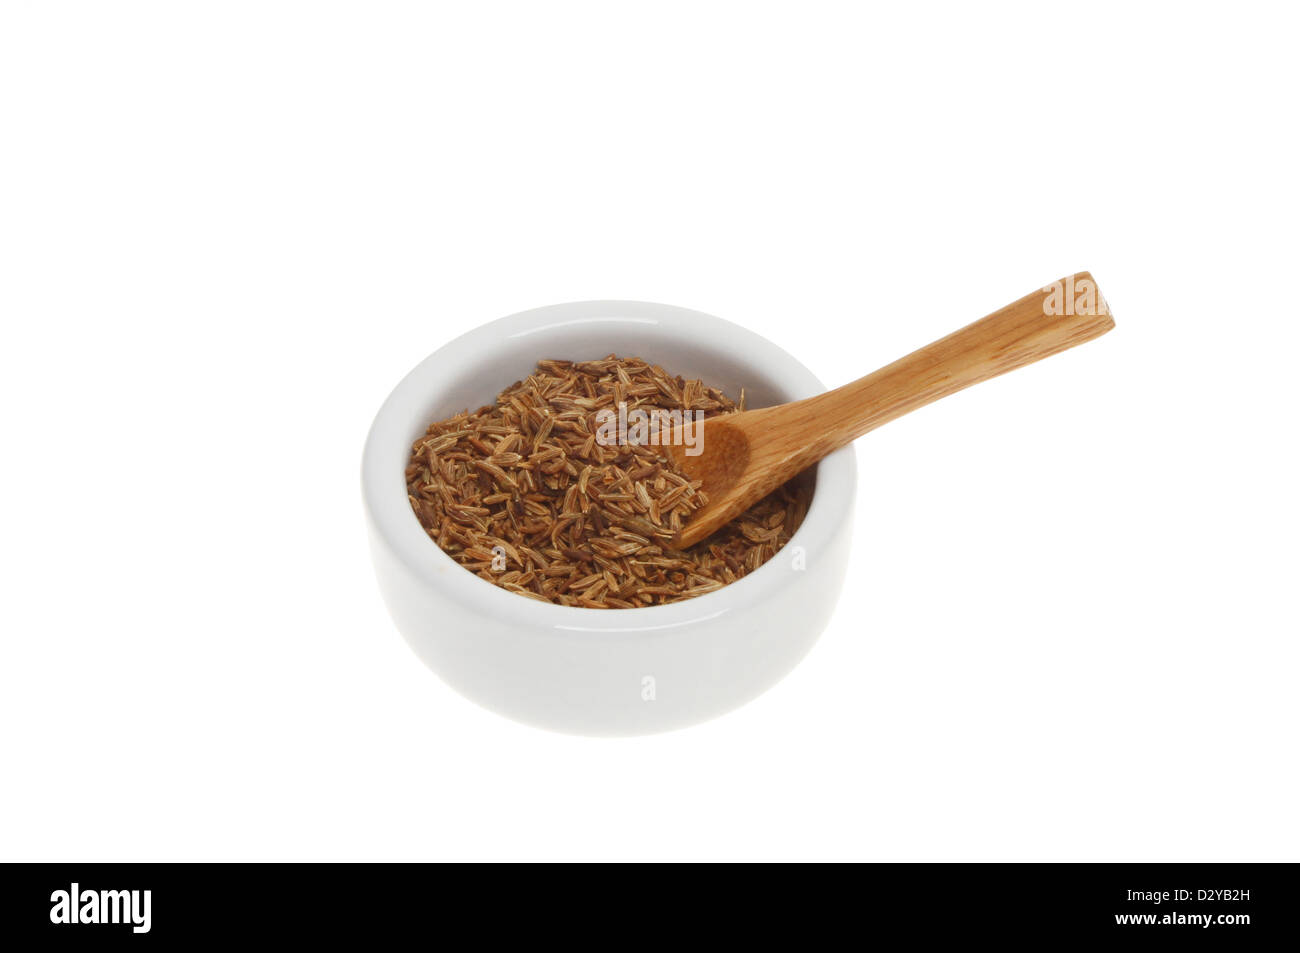 Cumin seeds in a ramekin with a wooden spoon isolated against white Stock Photo